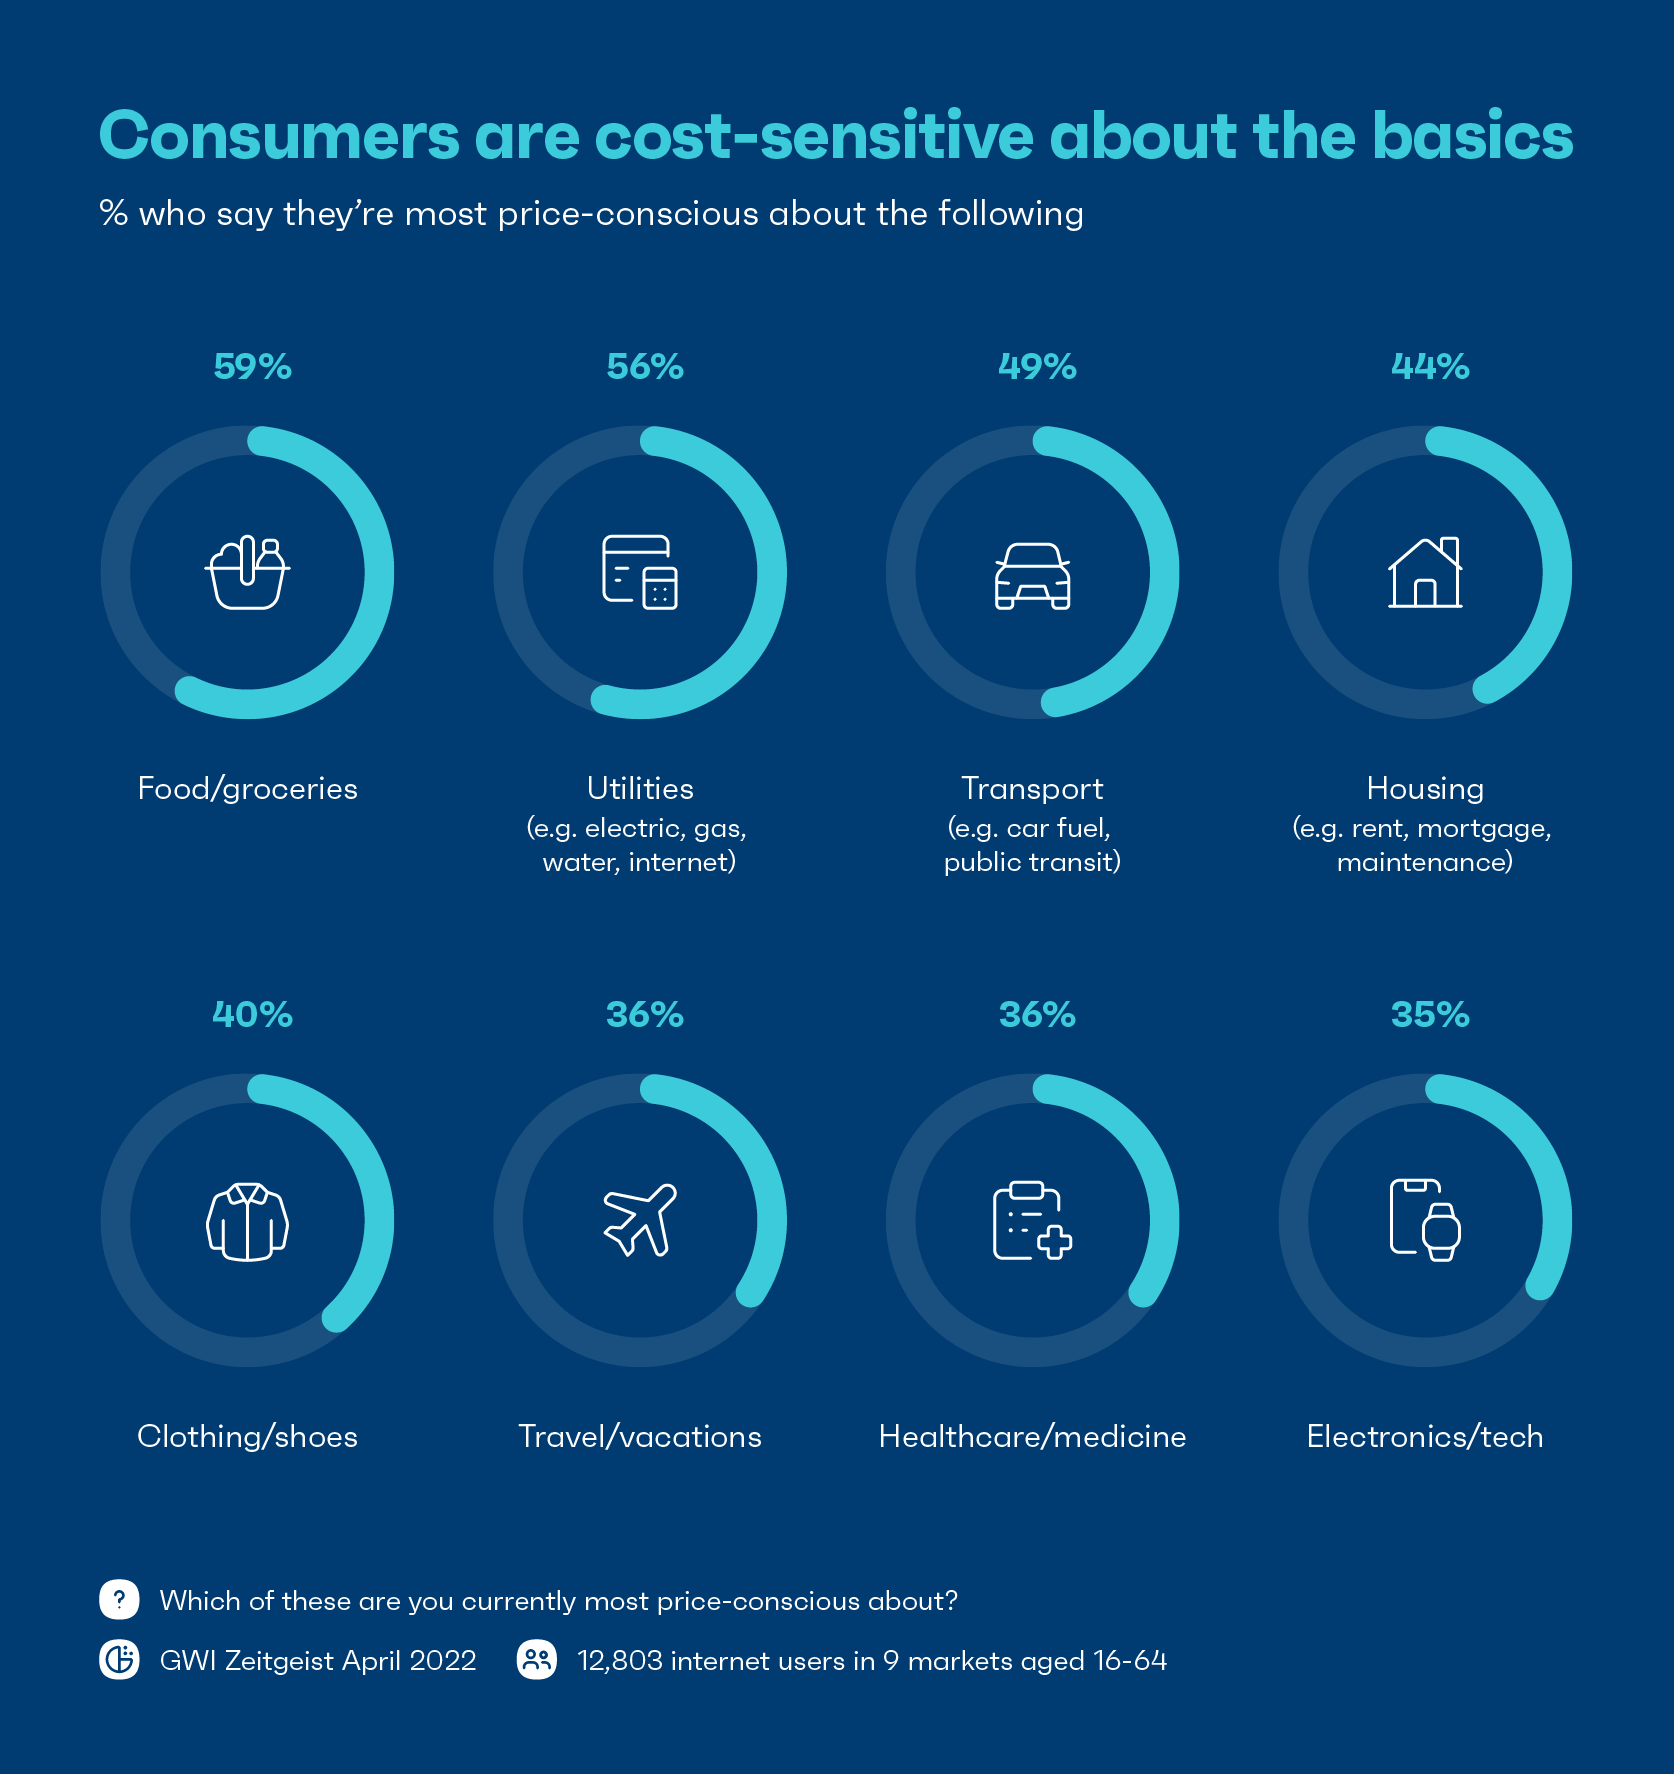 Consumers are cost-sensitive about the basics